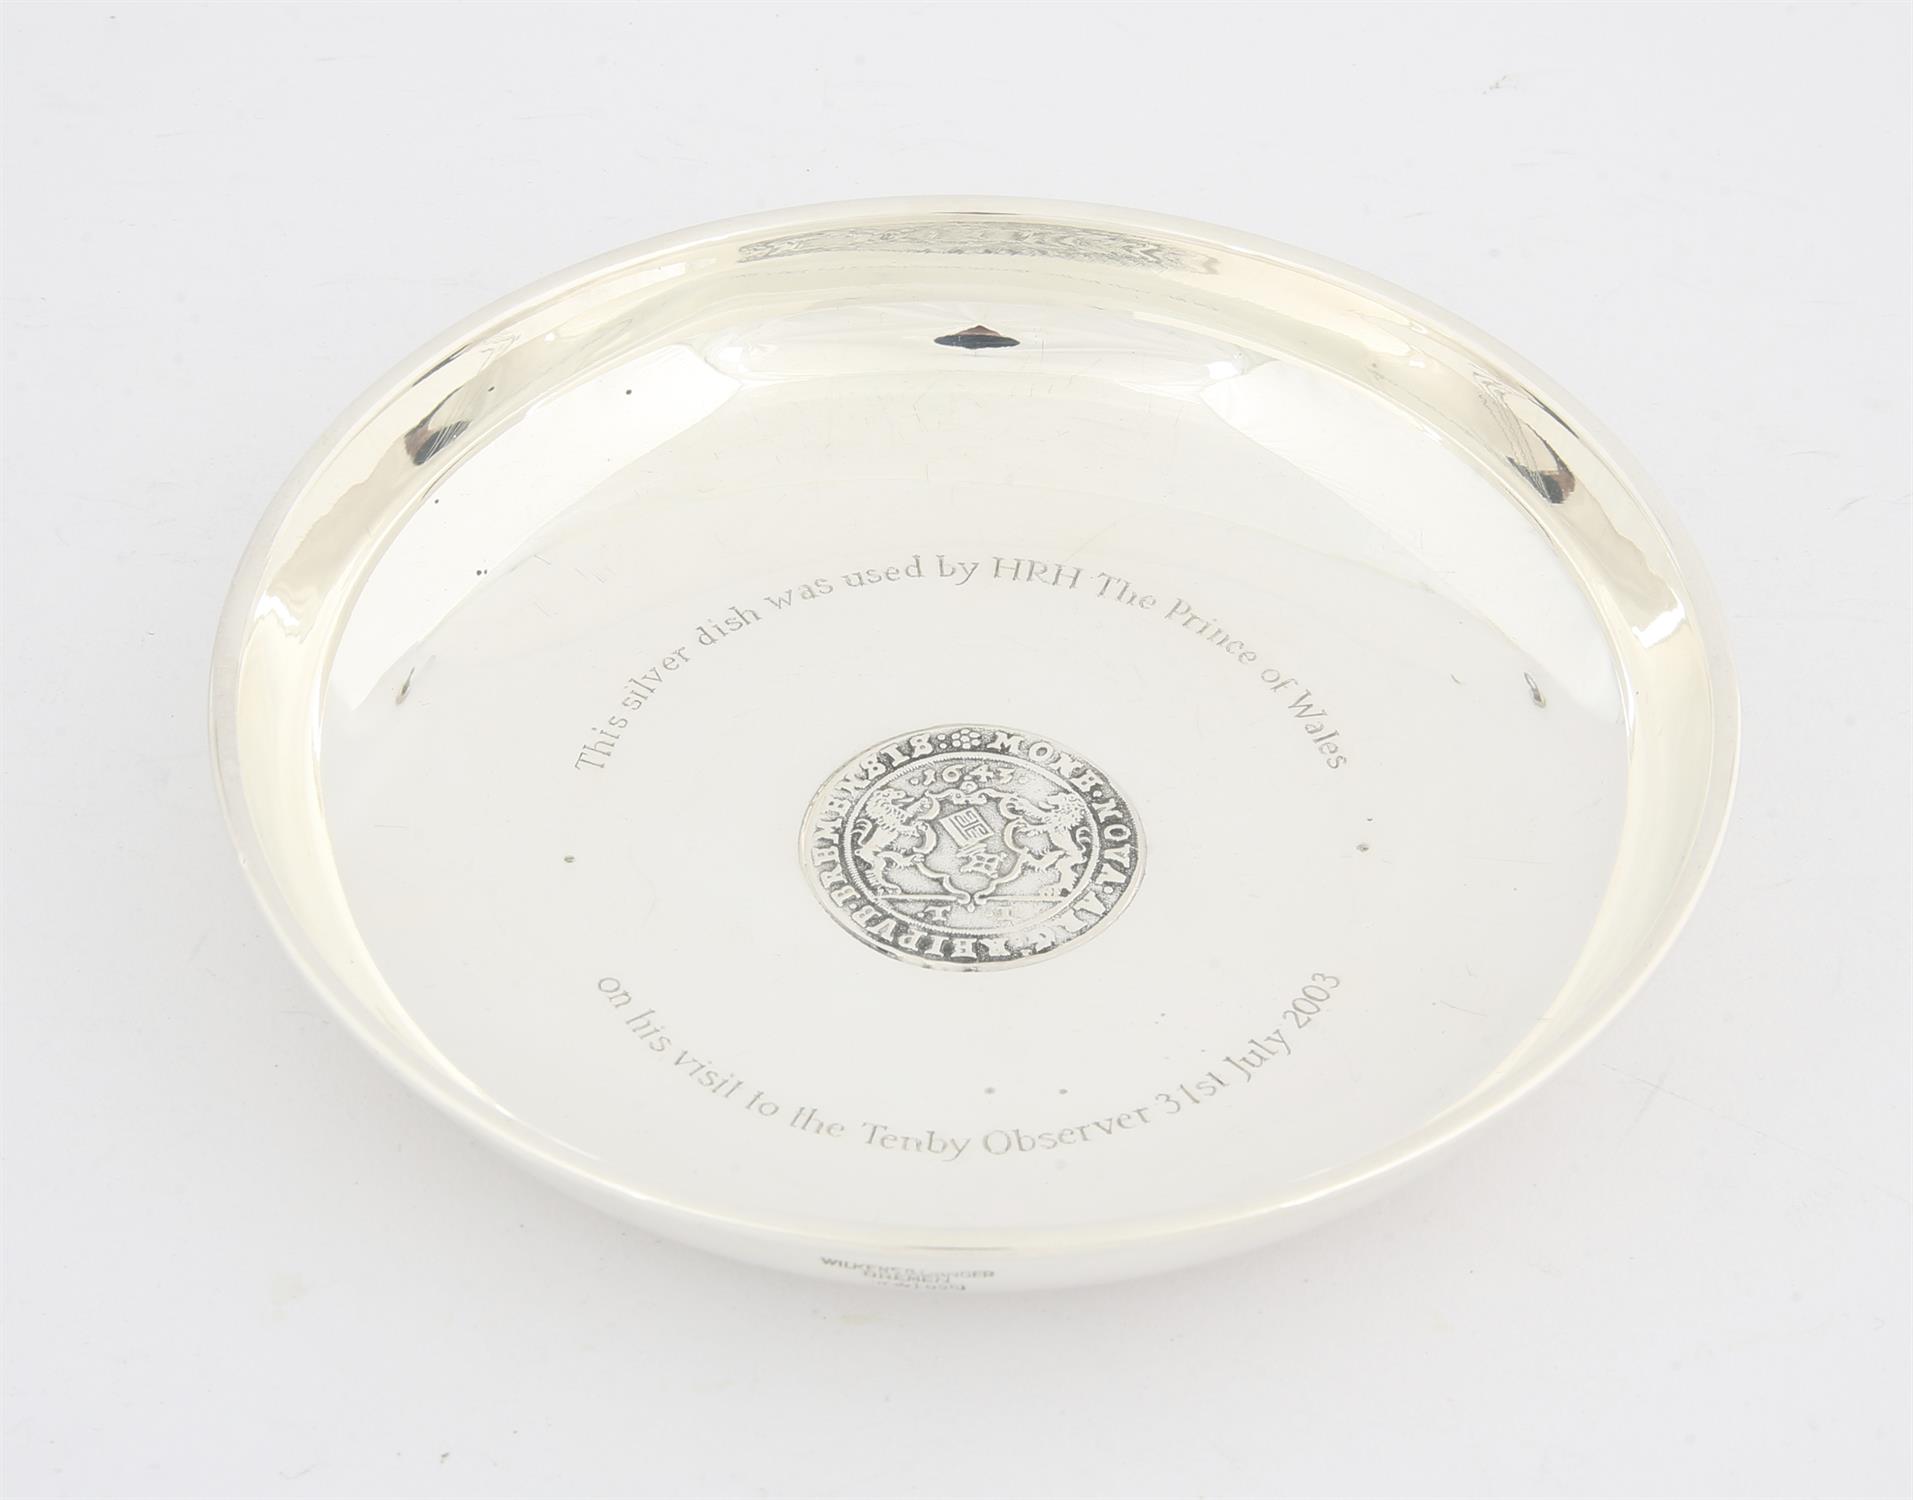 Silver dish with coin inset, stamped 935, inscribed "This silver dish was used by H R H Prince of